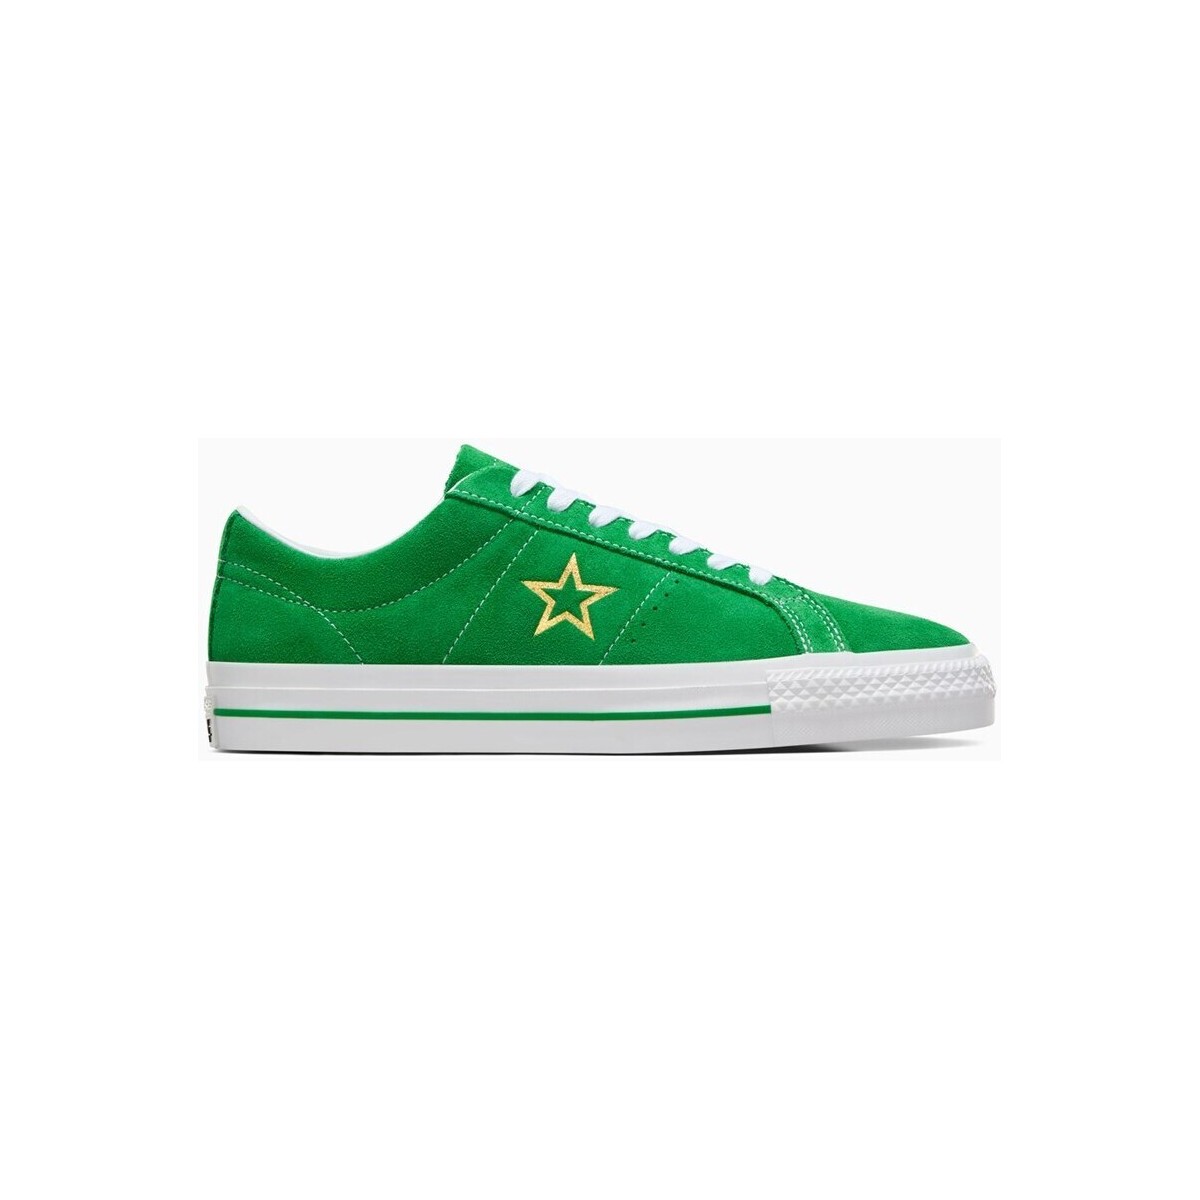 Converse One Star Pro Green